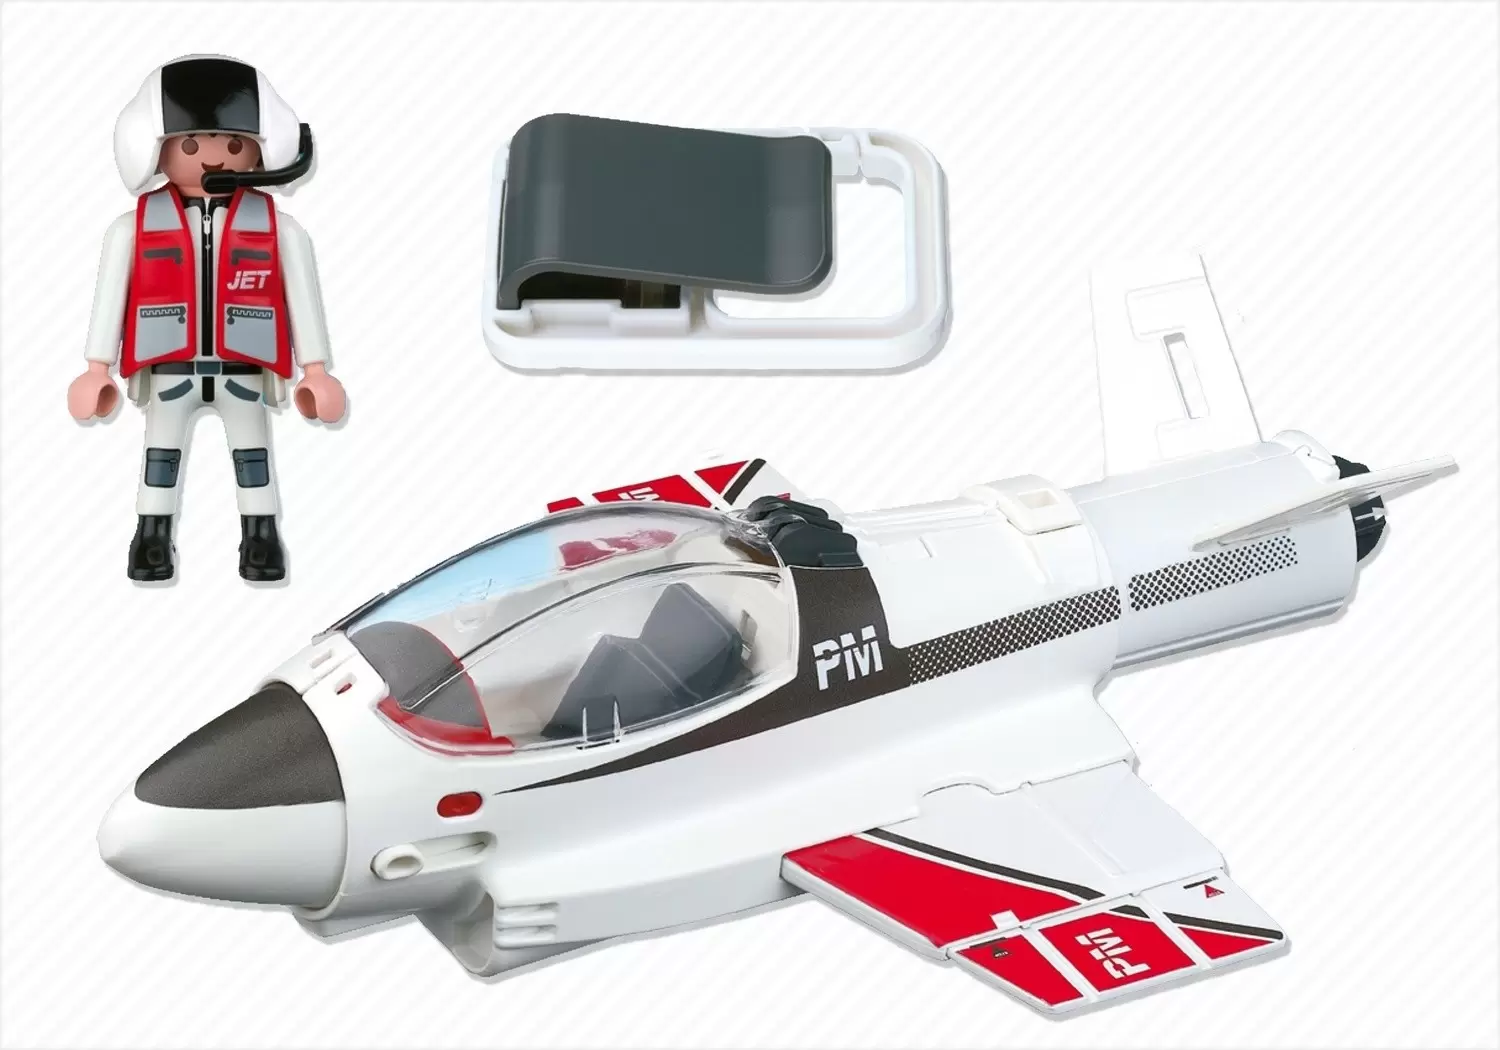 Playmobil Airport & Planes - Carry Along Jet